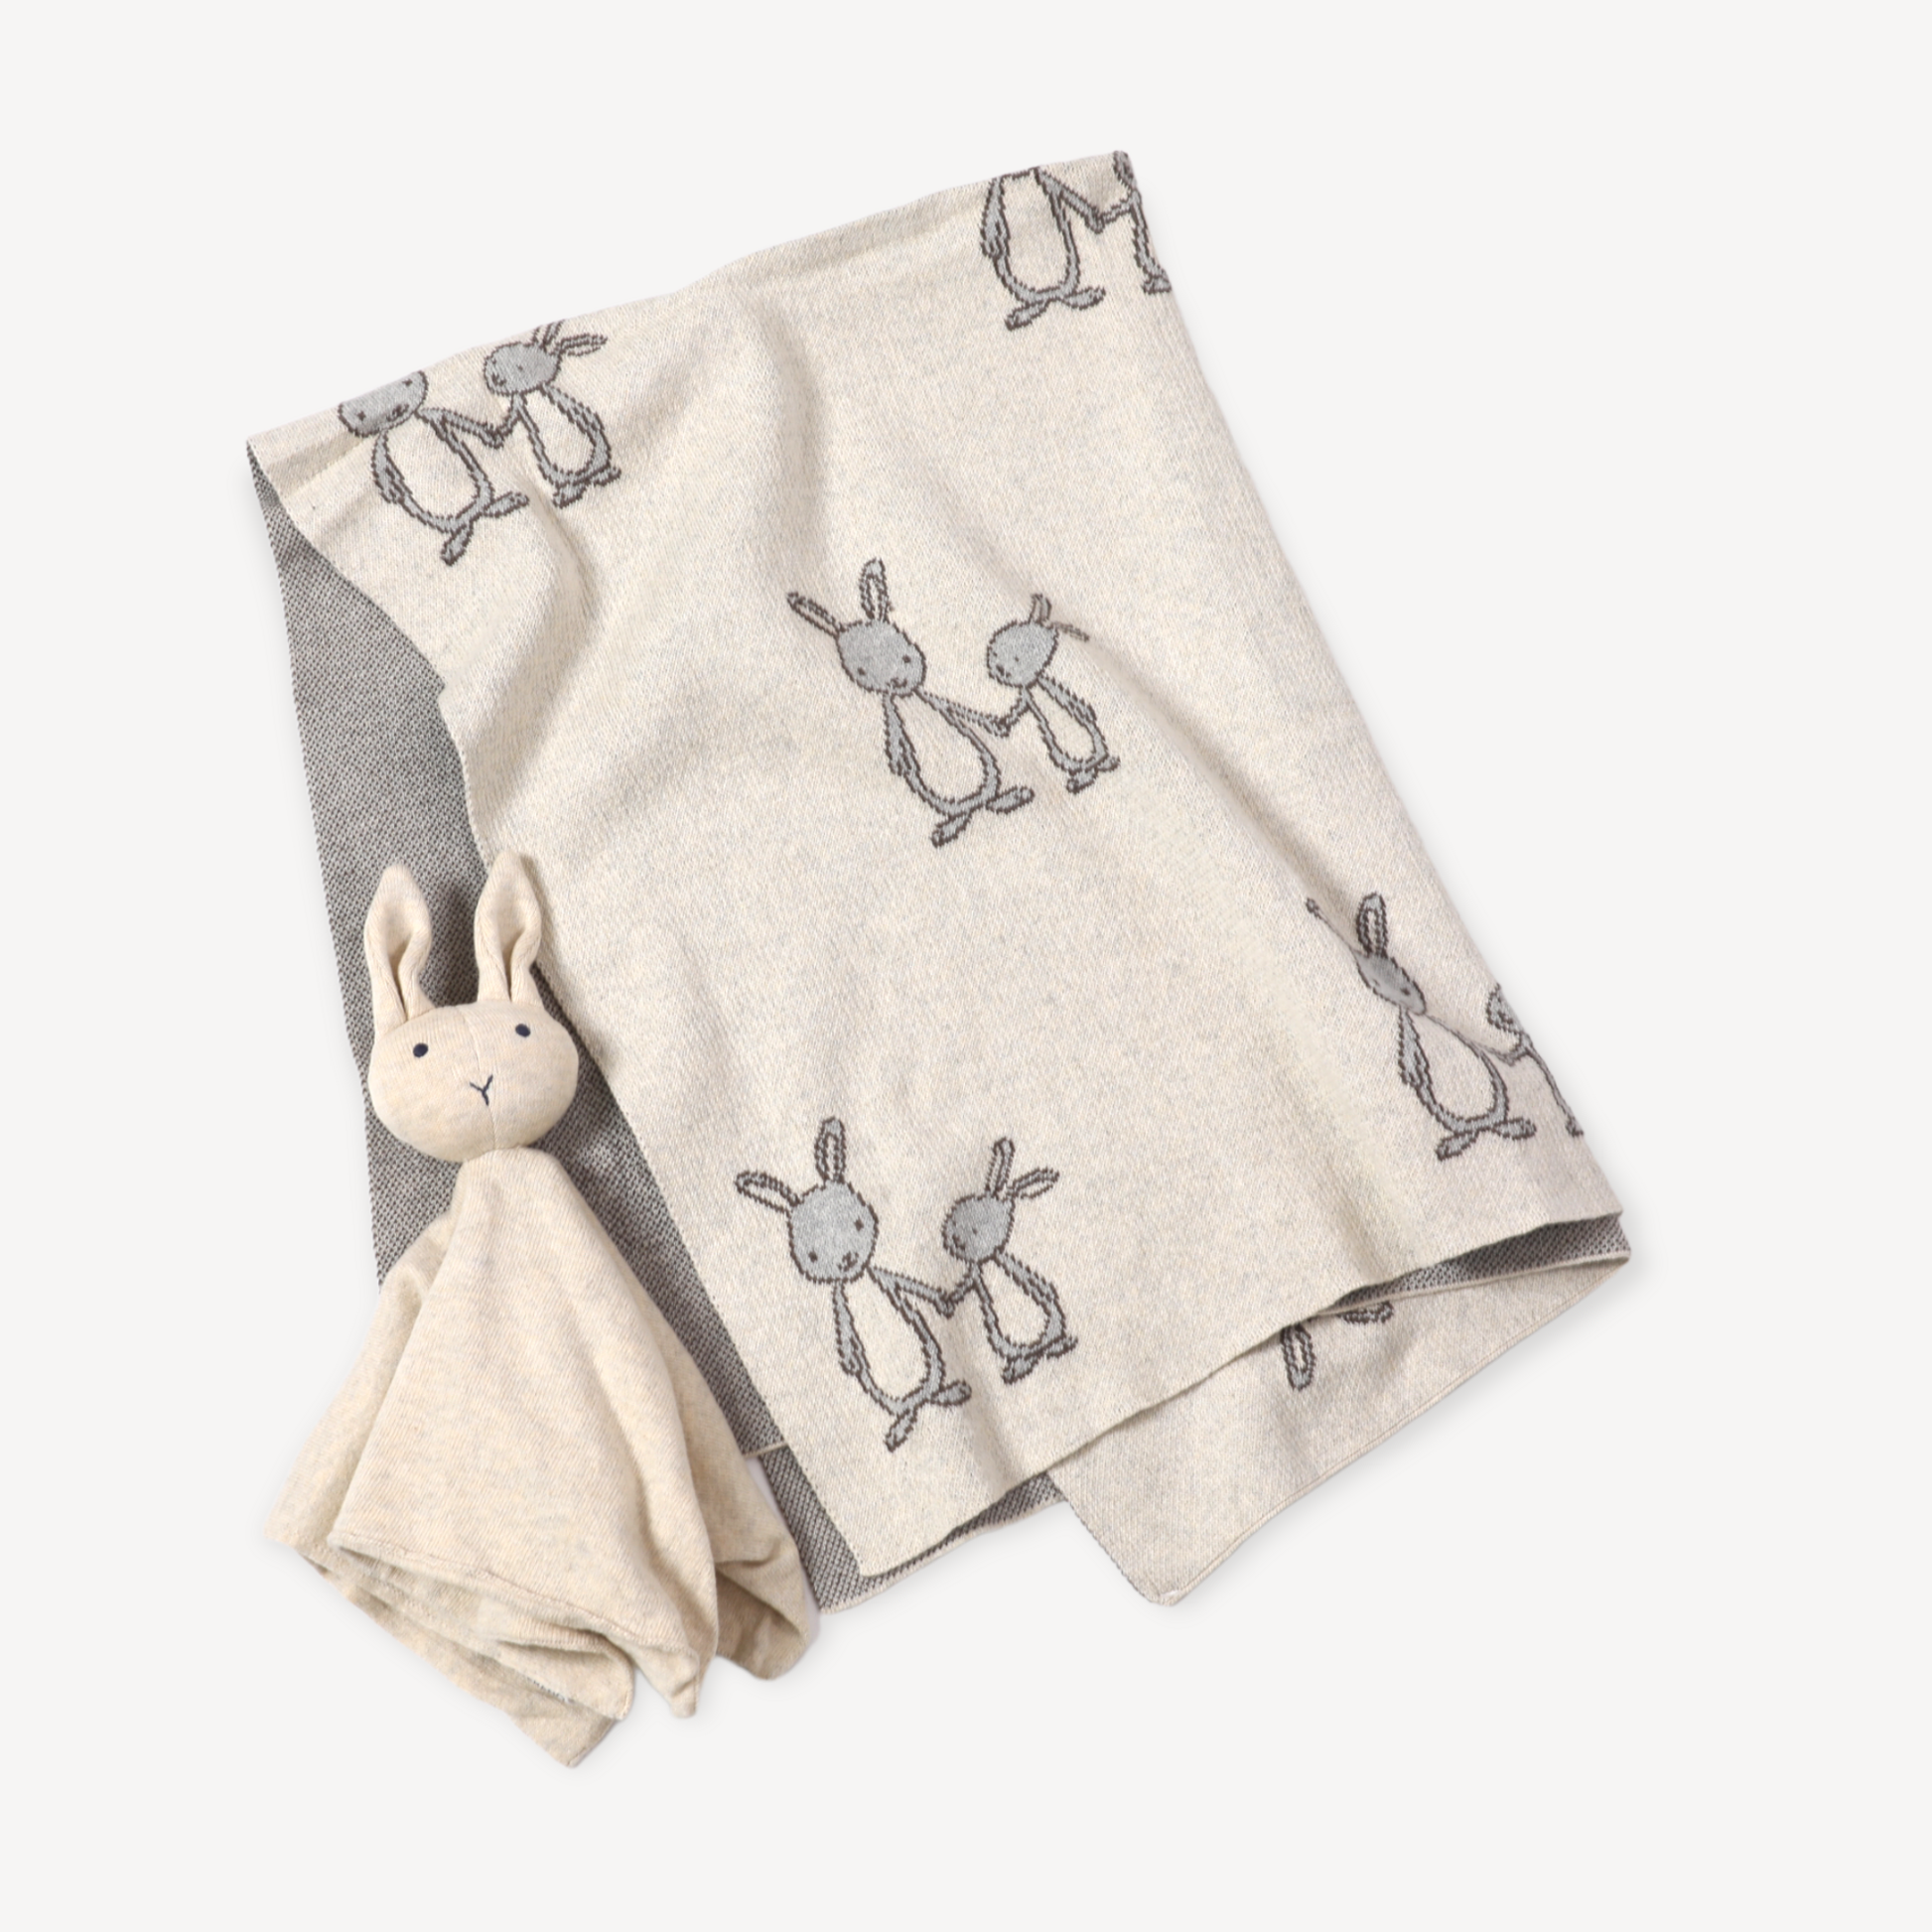 Bunny - Organic Cotton Jacquard Sweater Knit Baby Blanket - Grace & Haven